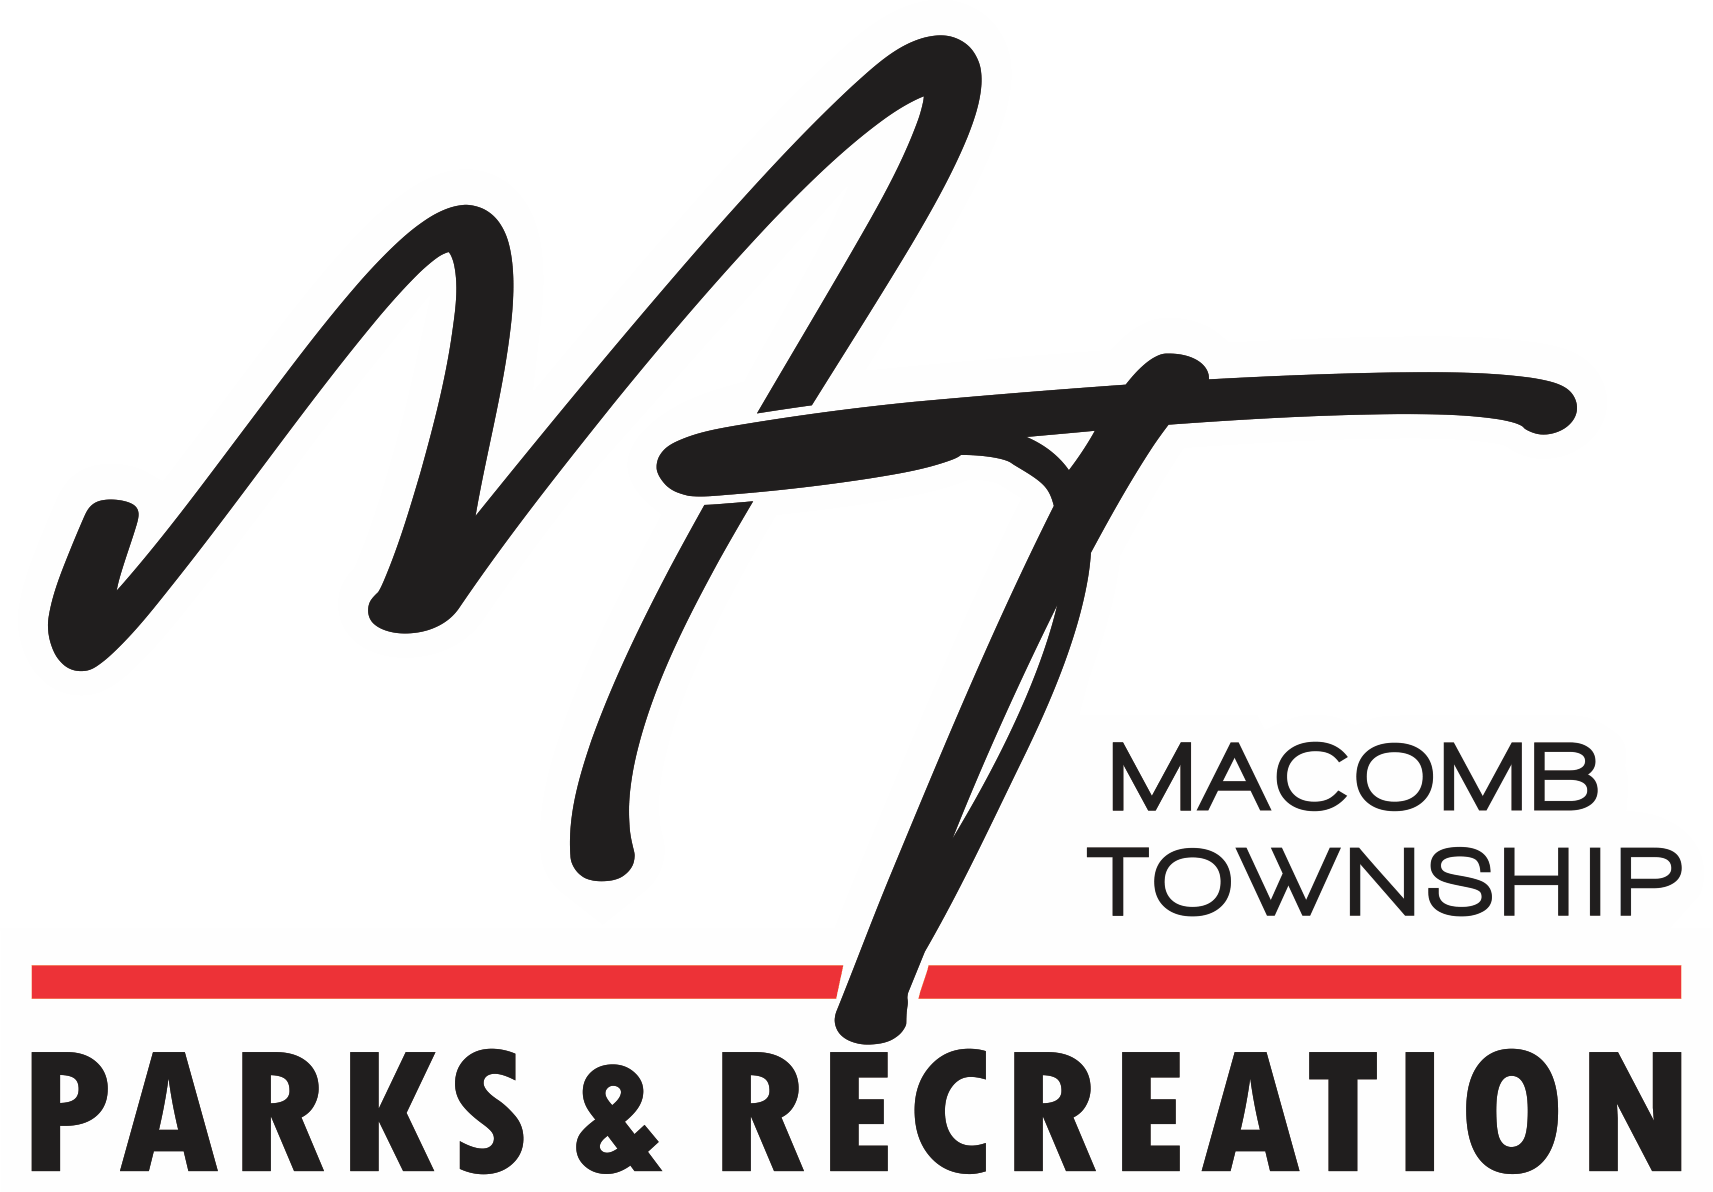 Macomb Township Parks and Recreation Department